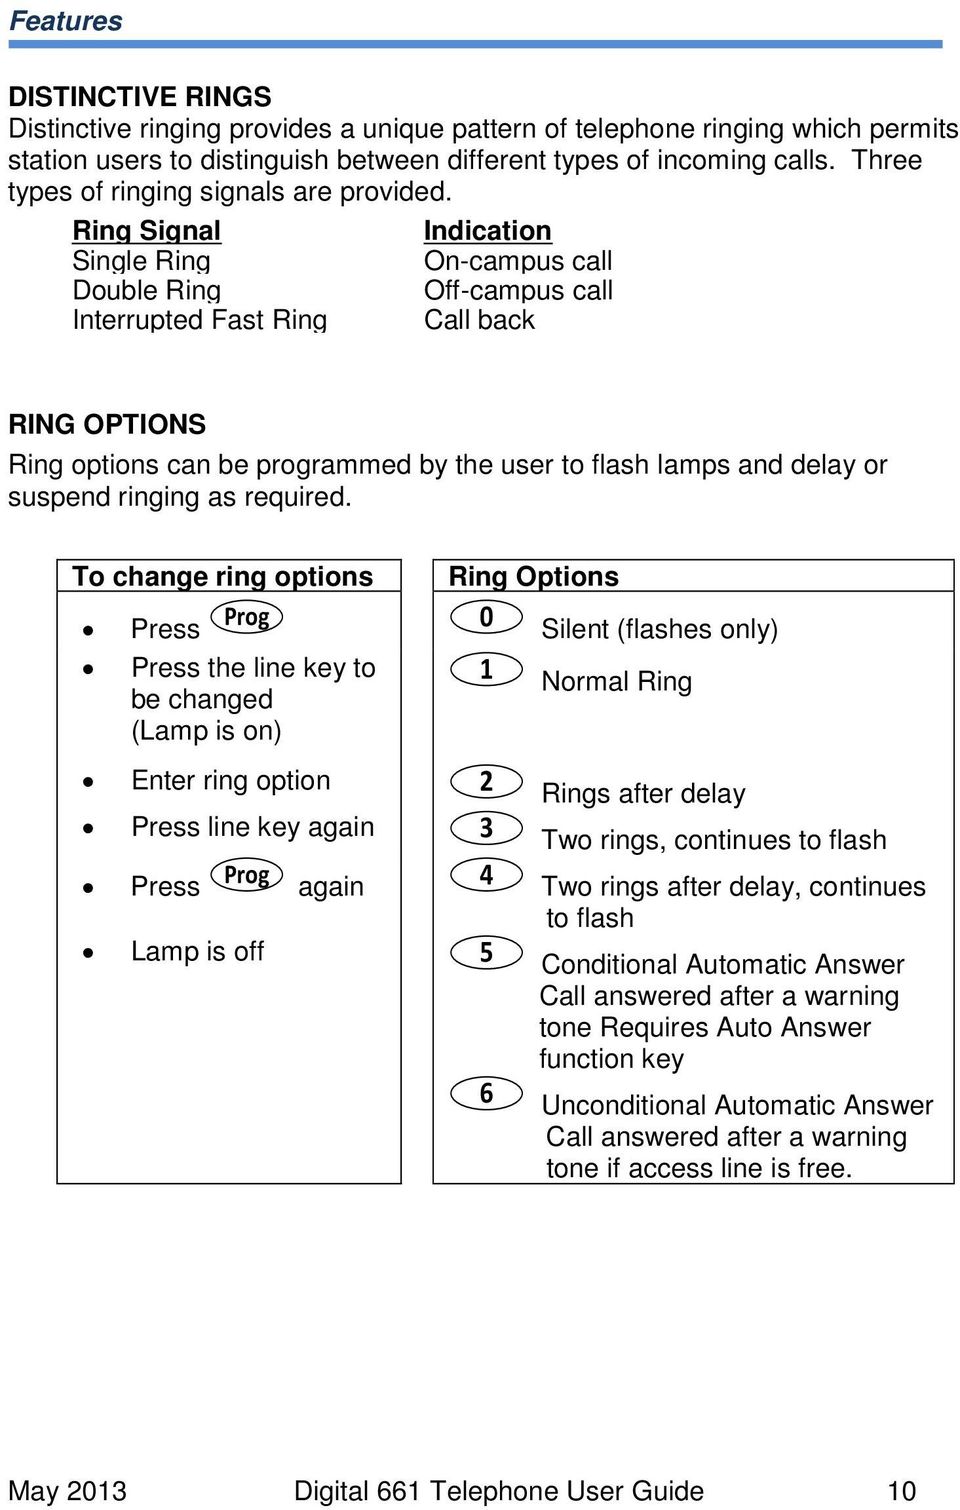 Ring Signal Indication Single Ring On-campus call Double Ring Off-campus call Interrupted Fast Ring Call back RING OPTIONS Ring options can be programmed by the user to flash lamps and delay or